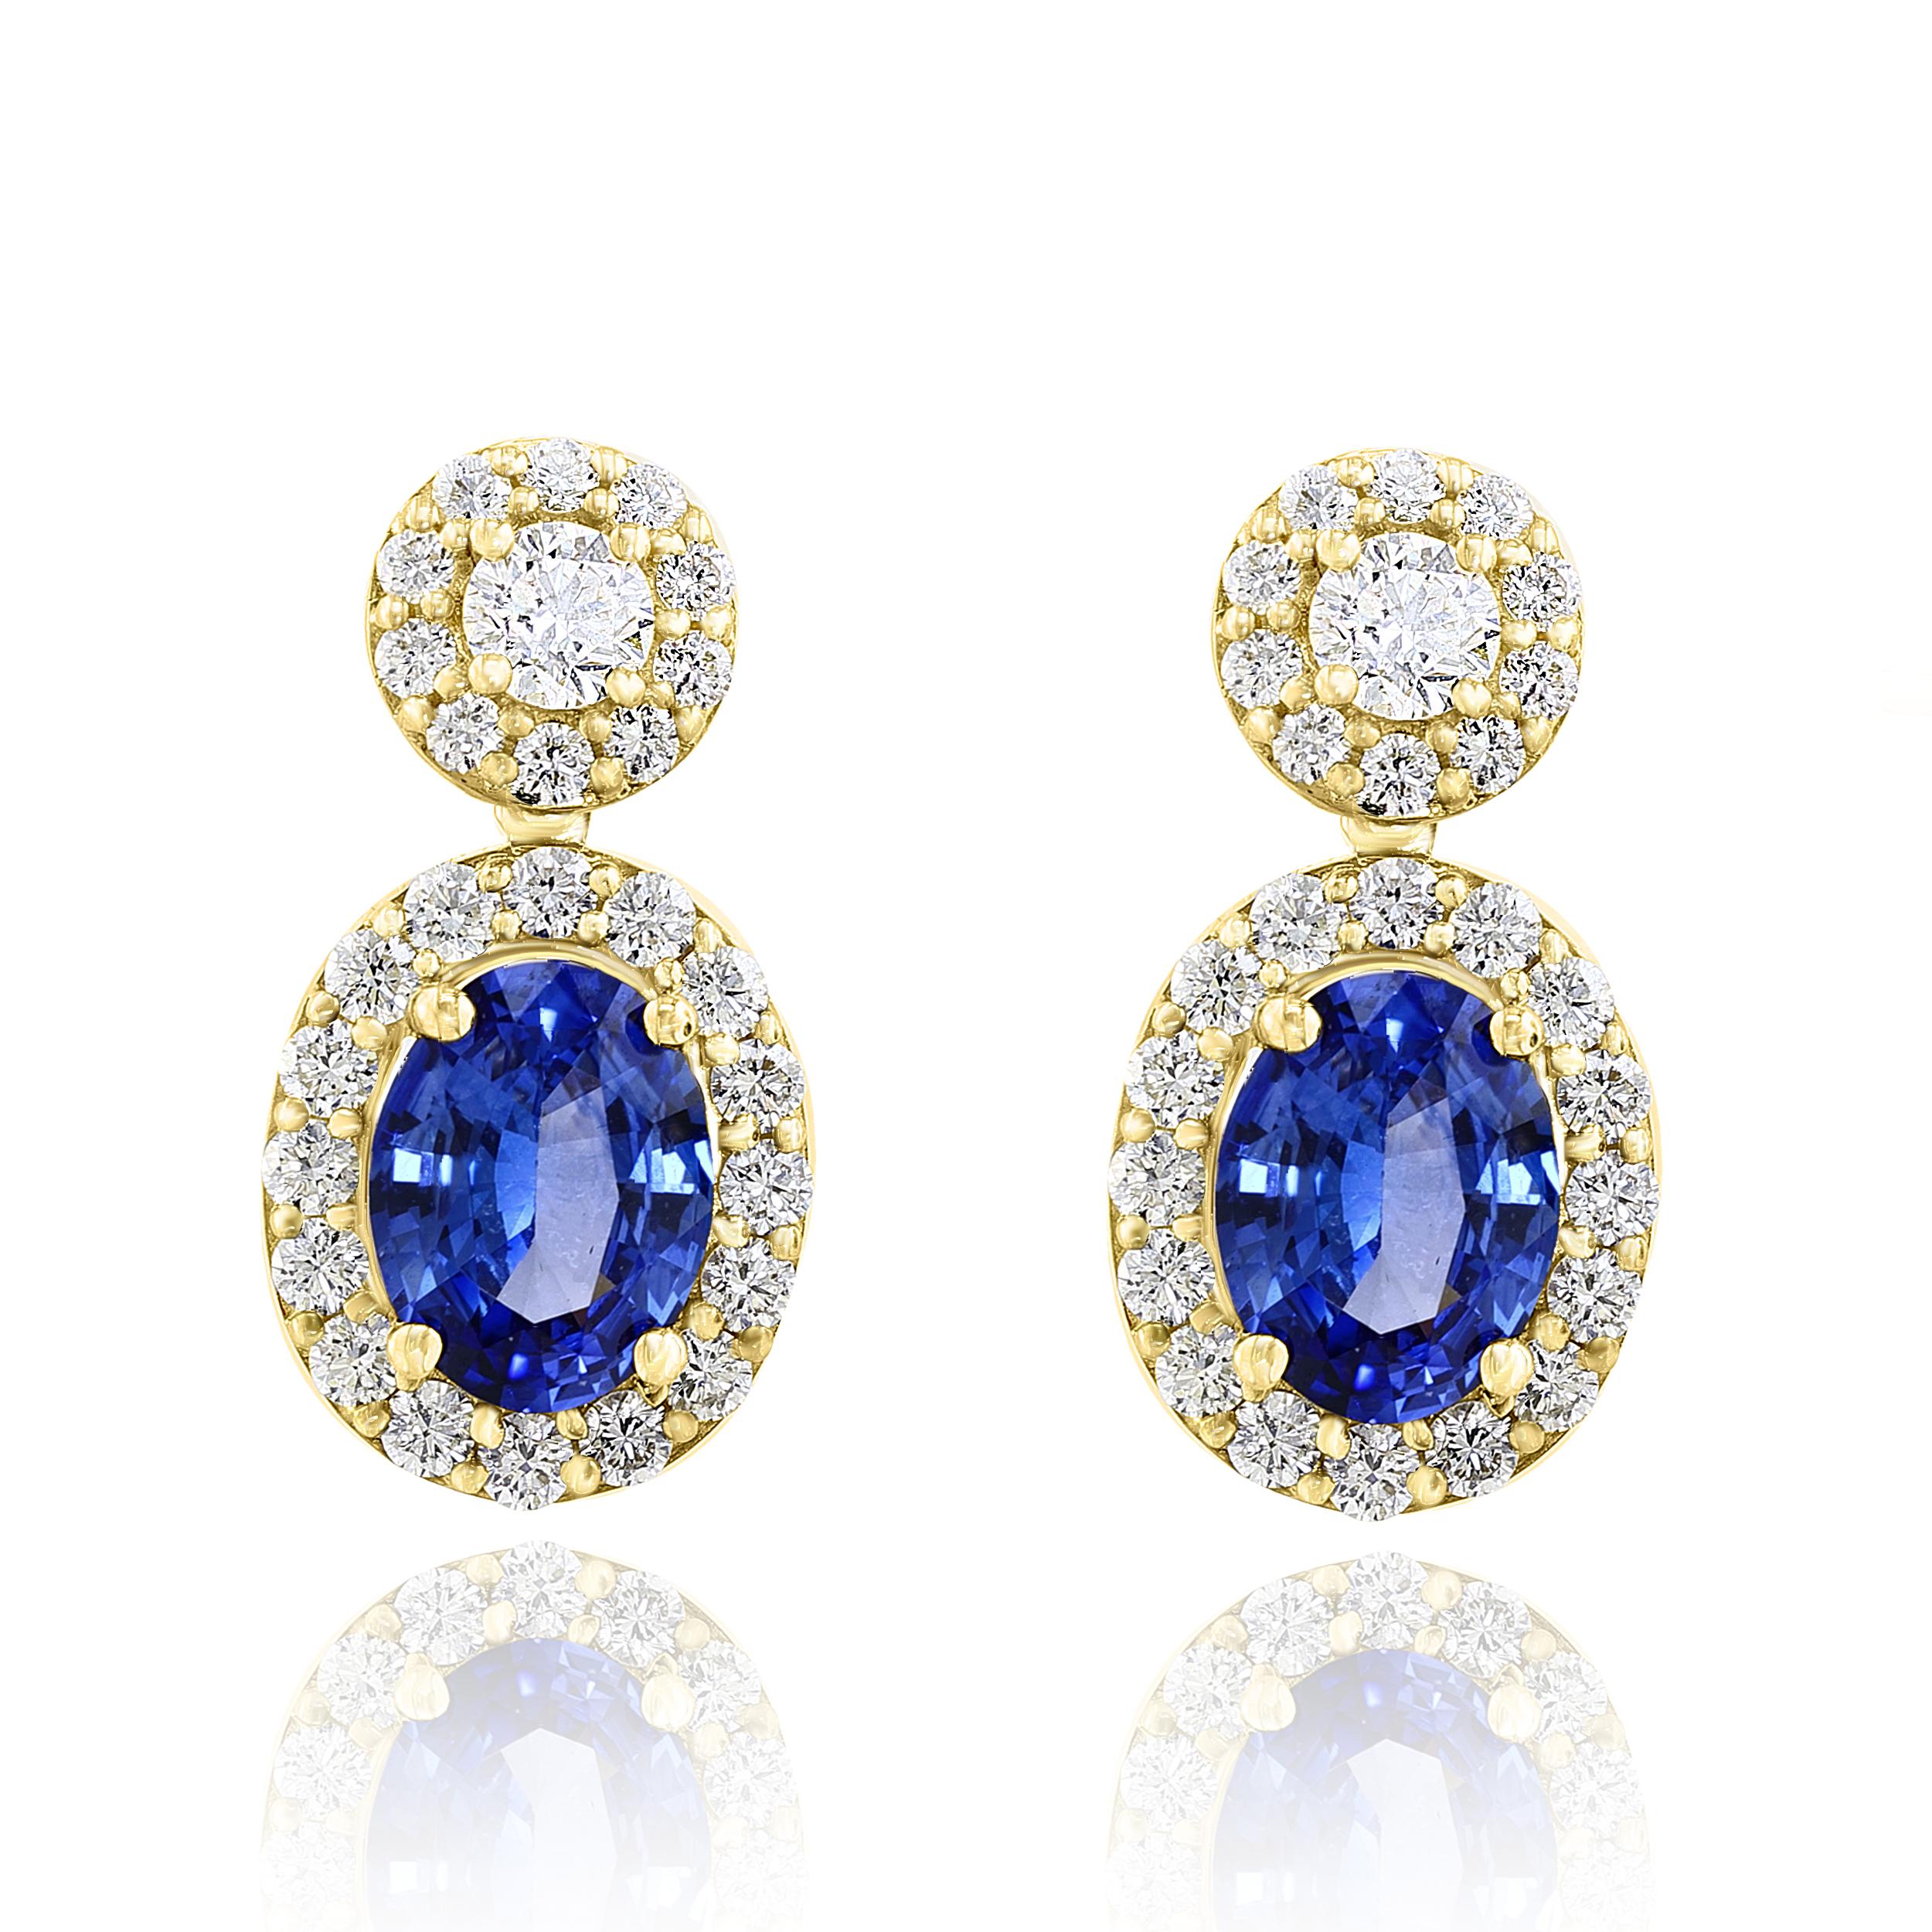 A beautiful and chic pair of drop earrings showcasing brilliant-cut diamonds, and oval shaped Blue Sapphires set in an intricate and stylish design. 2  Diamonds on the top weigh 0.36 carats in total.  2  Blue sapphires weigh 3.04 carats in total.